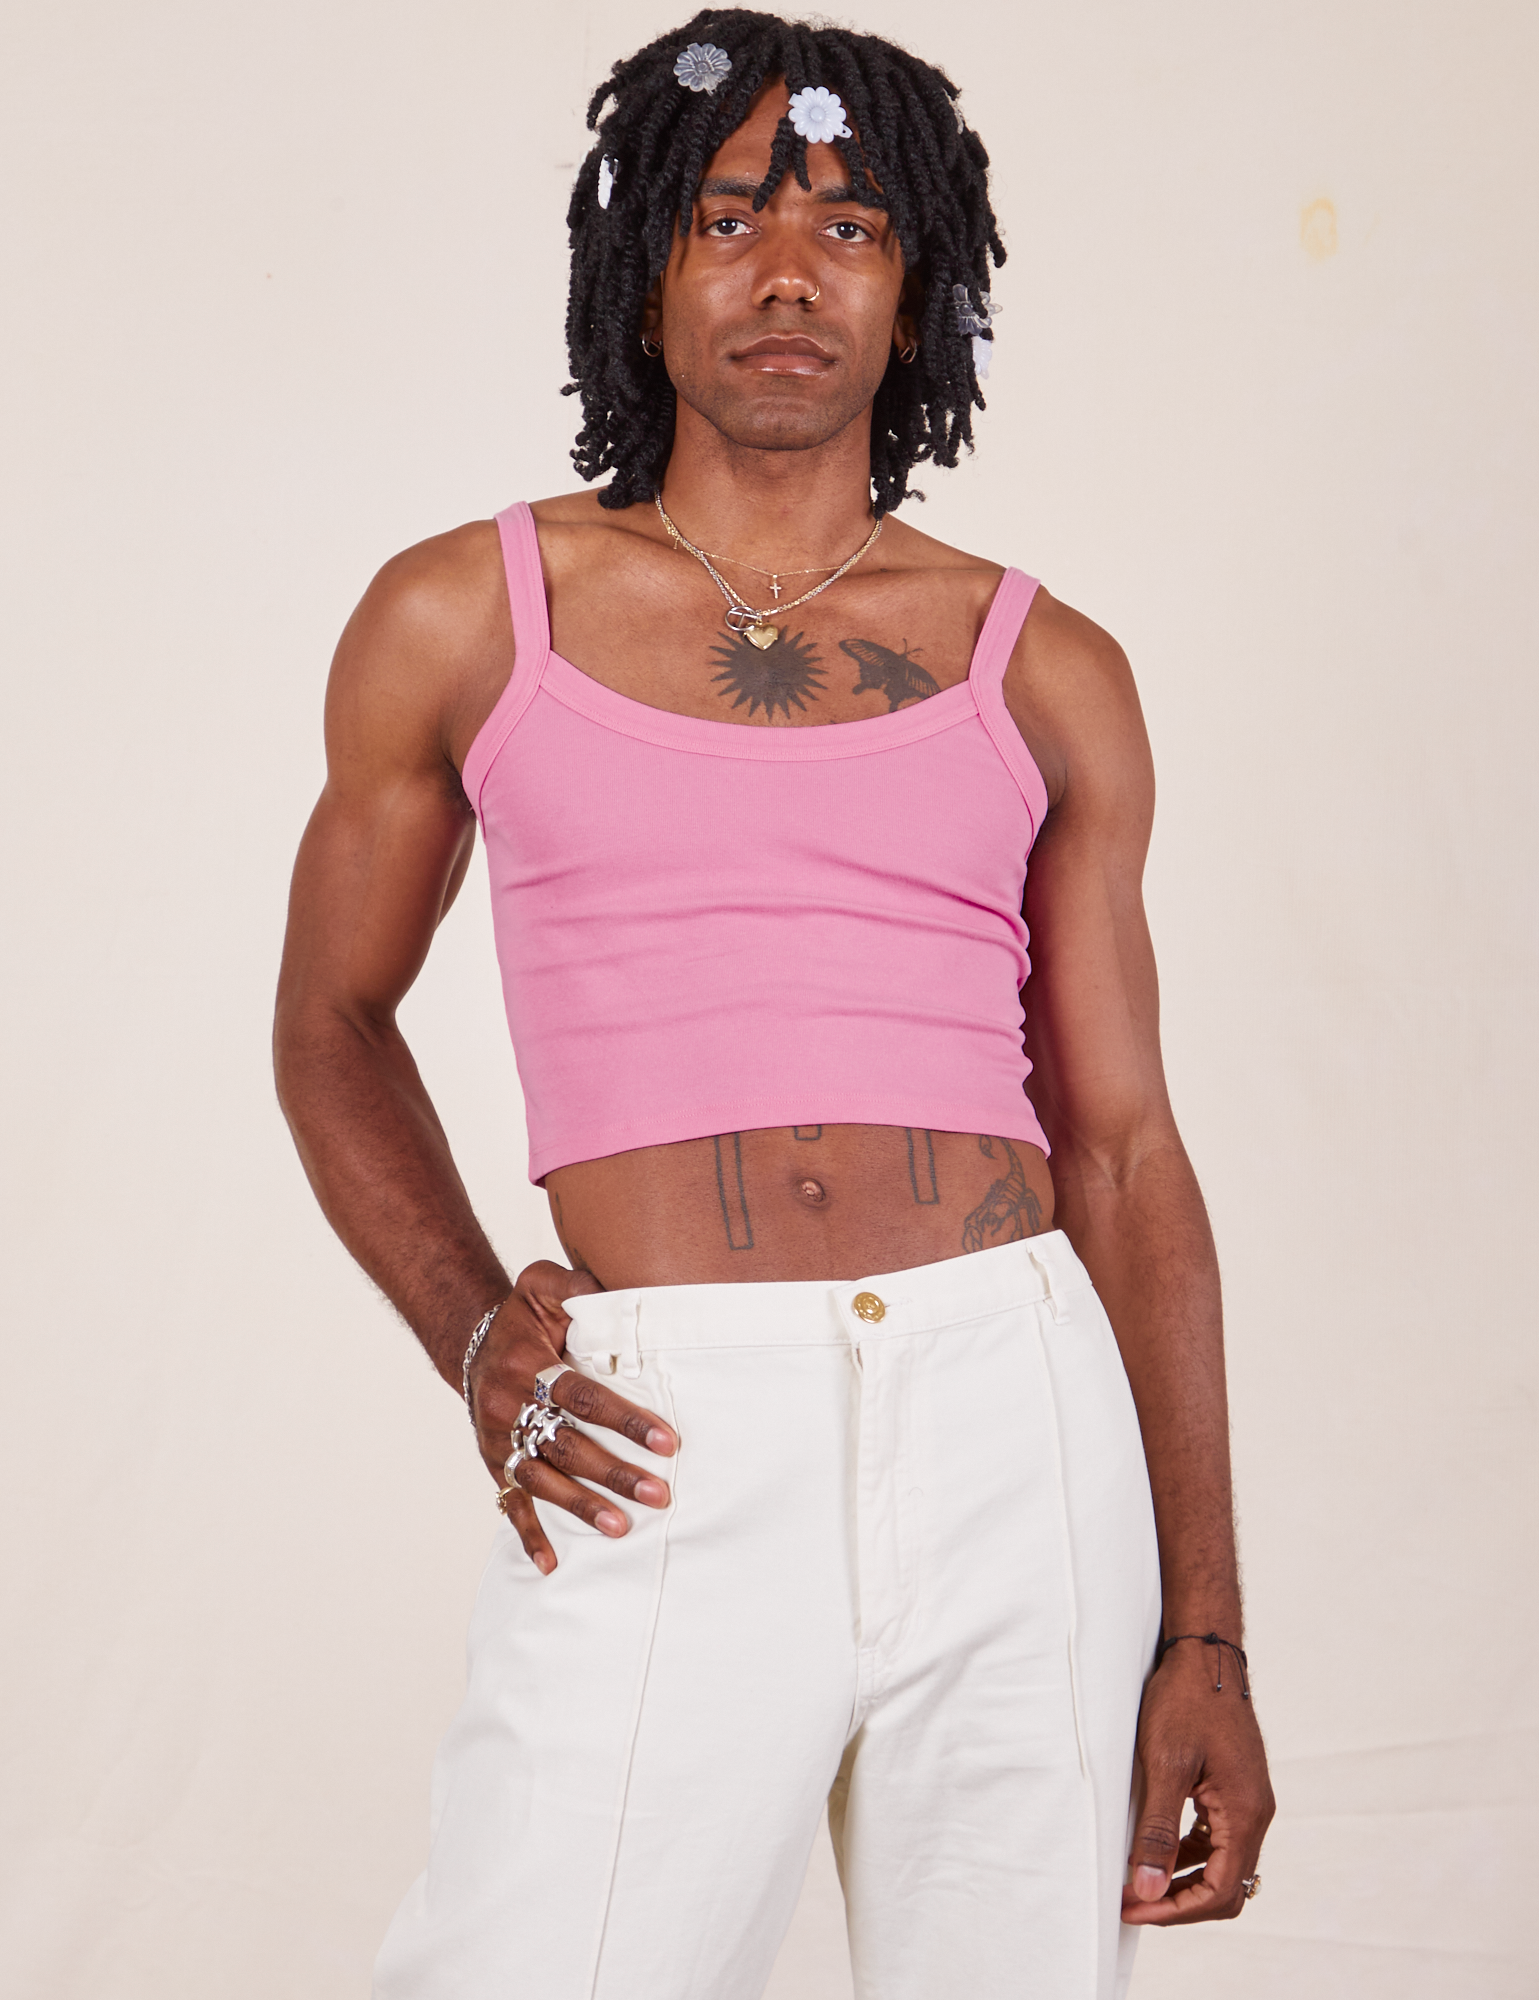 Jerrod is 6&#39;3&quot; and wearing S Cropped Cami in Bubblegum Pink paired with vintage off-white Western Pants